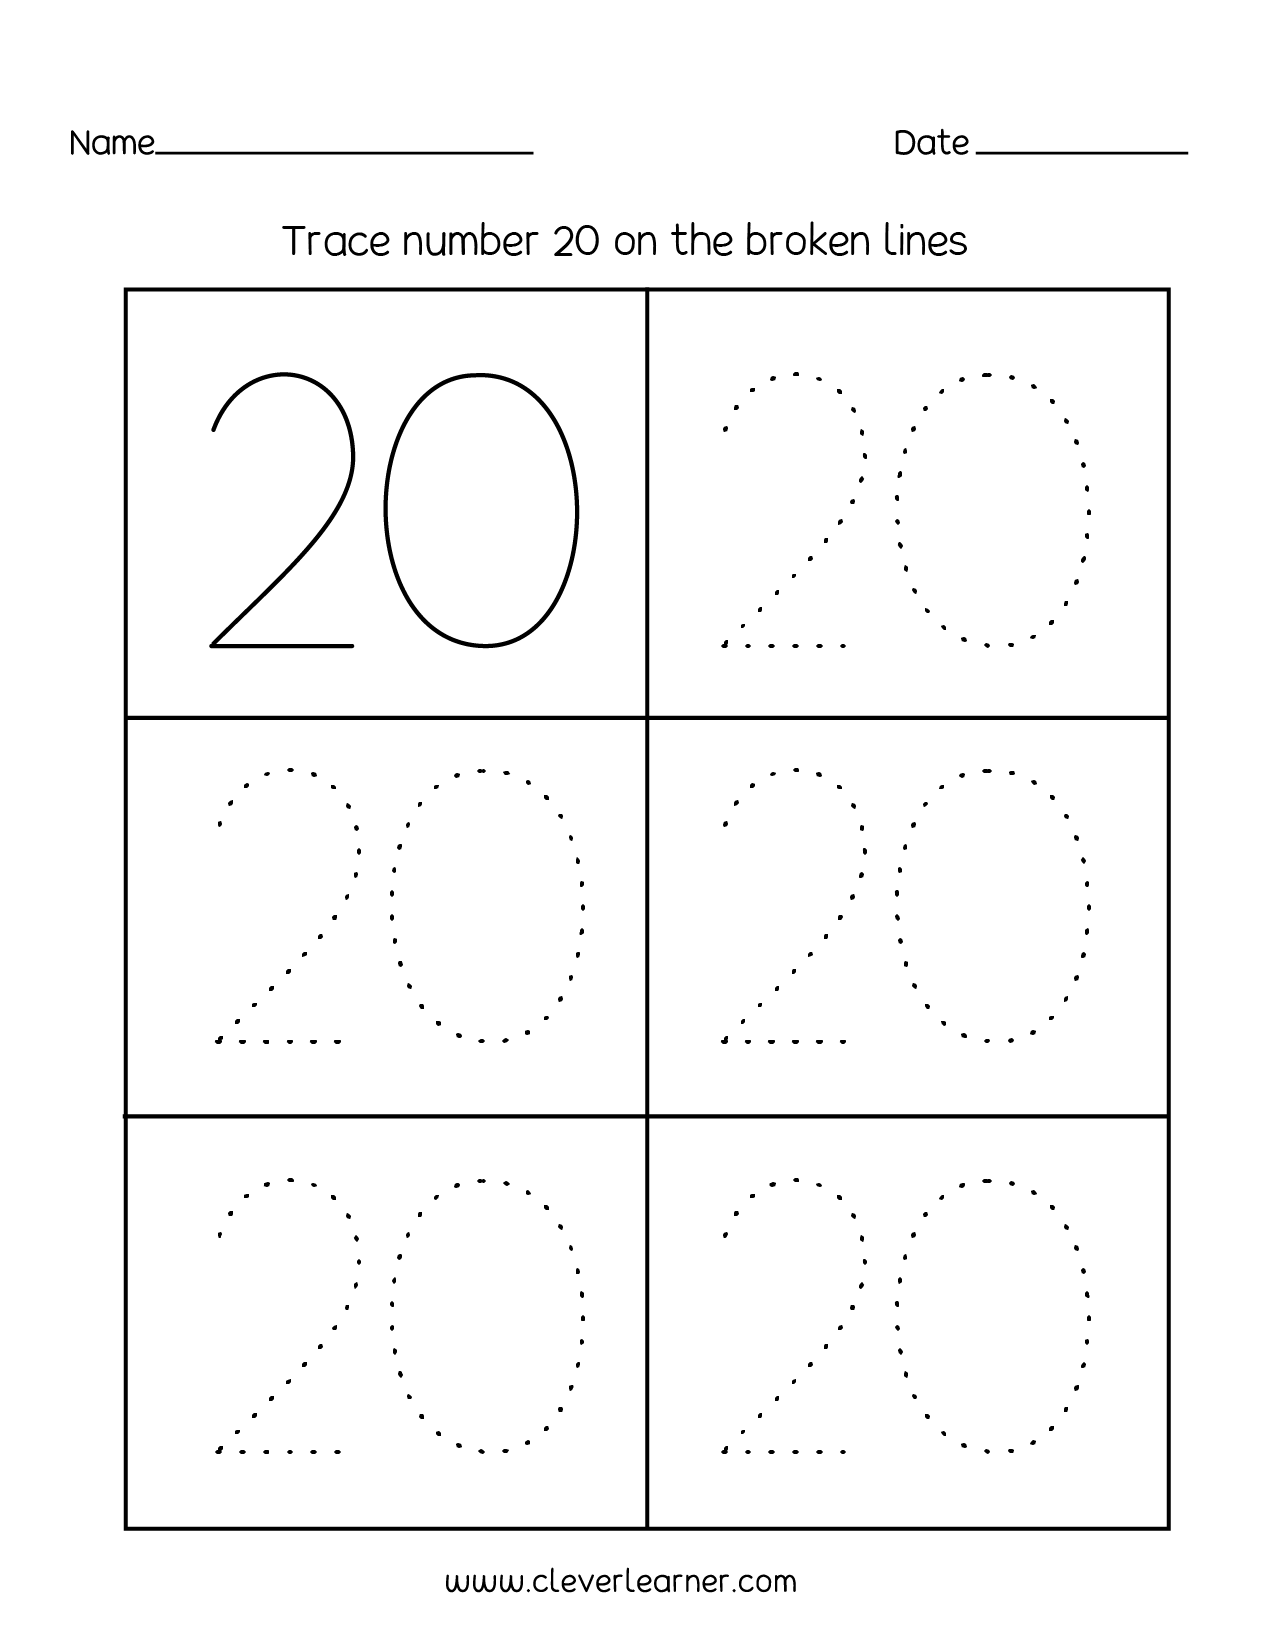 number-20-writing-counting-and-identification-printable-worksheets-for-children